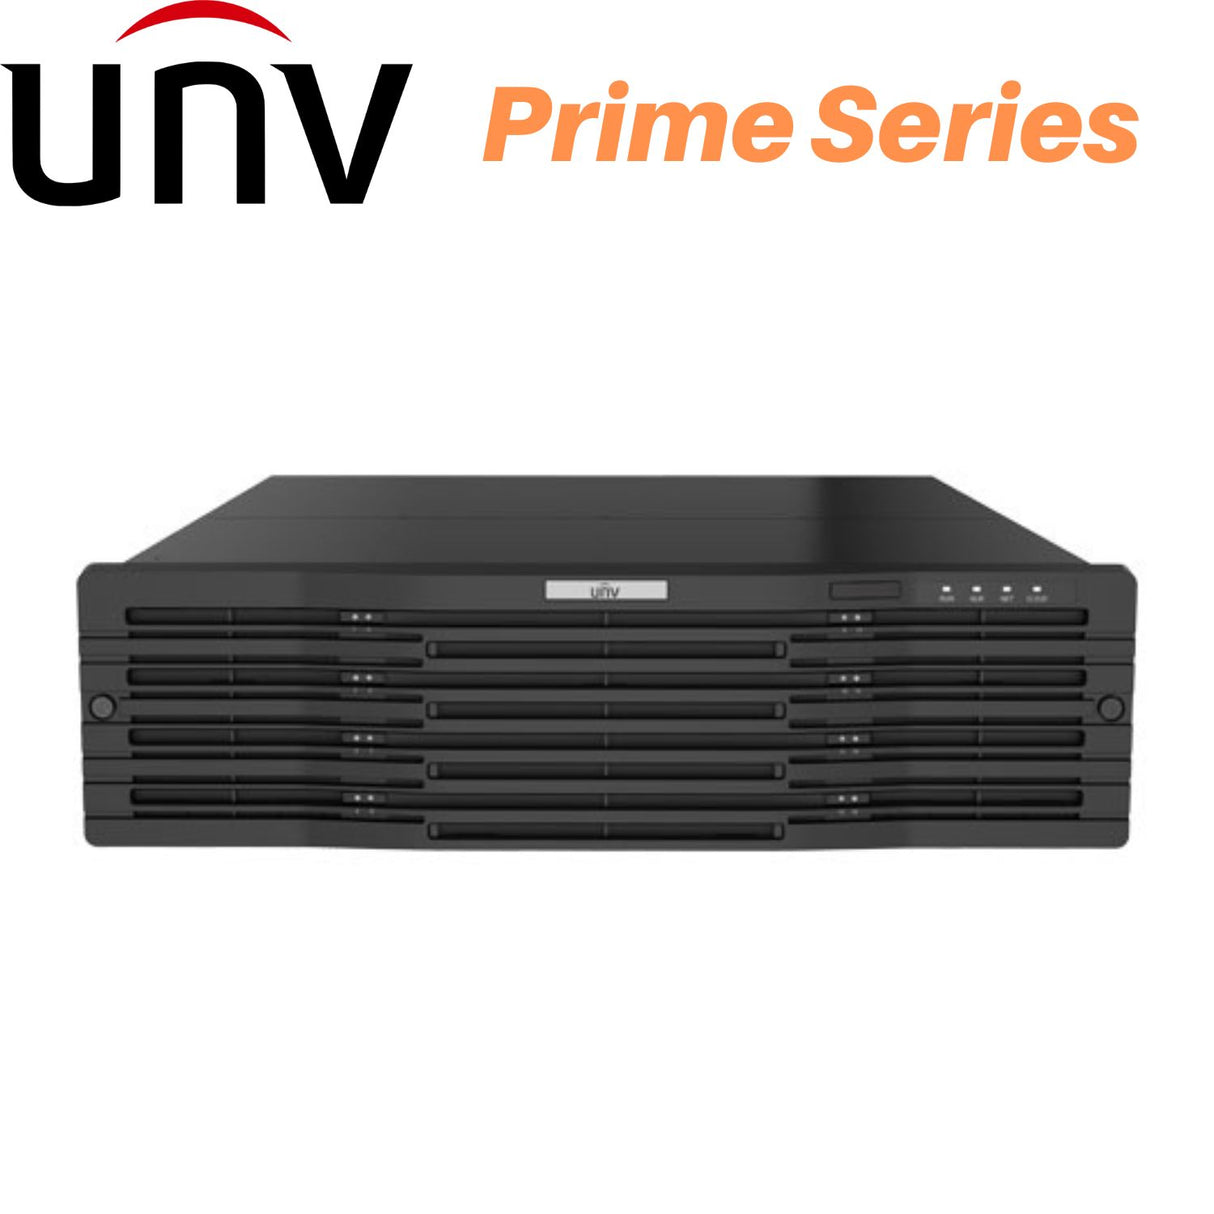 Uniview Network Video Recorder: 64 Channel 16 HDDs RAID NVR, Prime - NVR316-64R-B